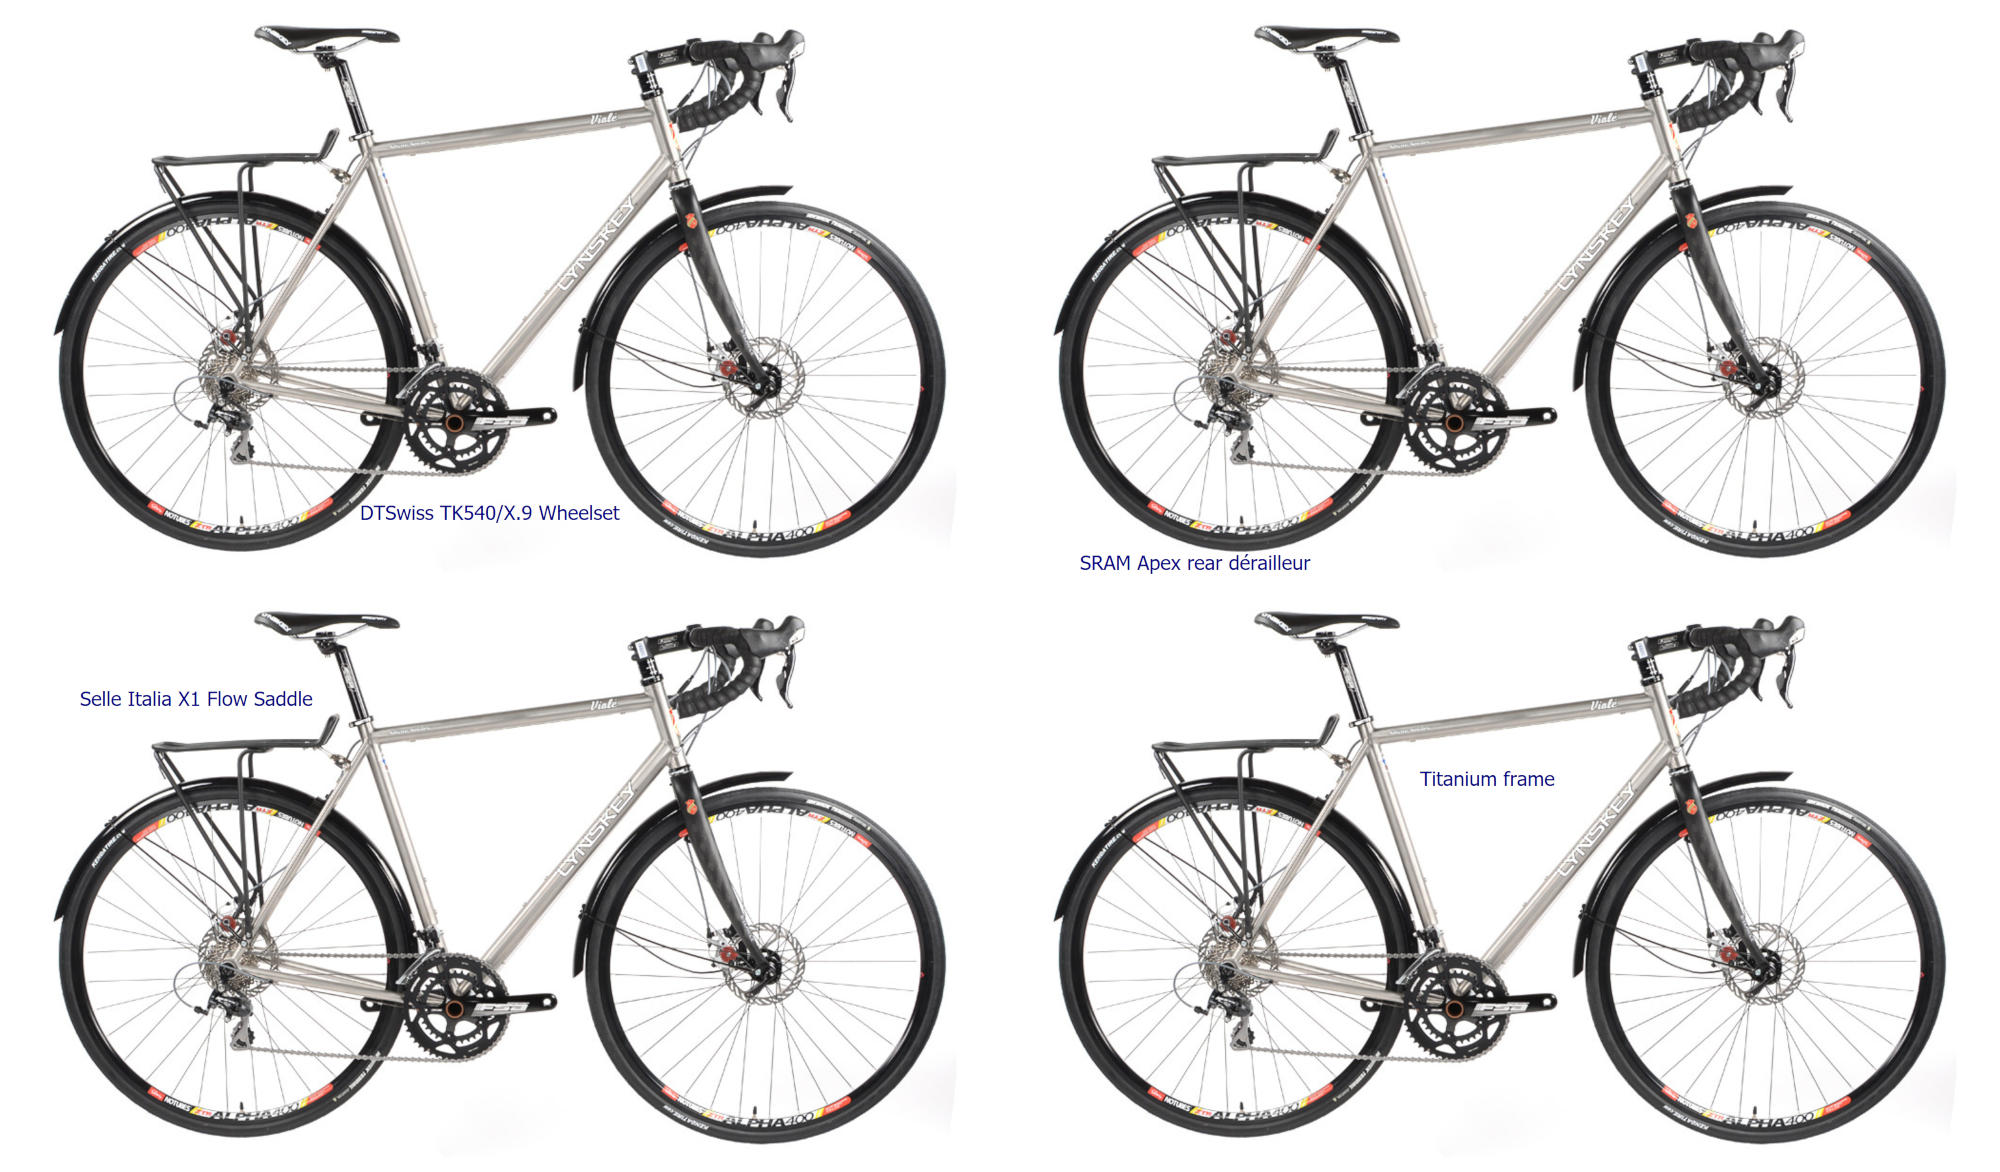 Four versions of the labelled bicycle, with only one label visible in each.